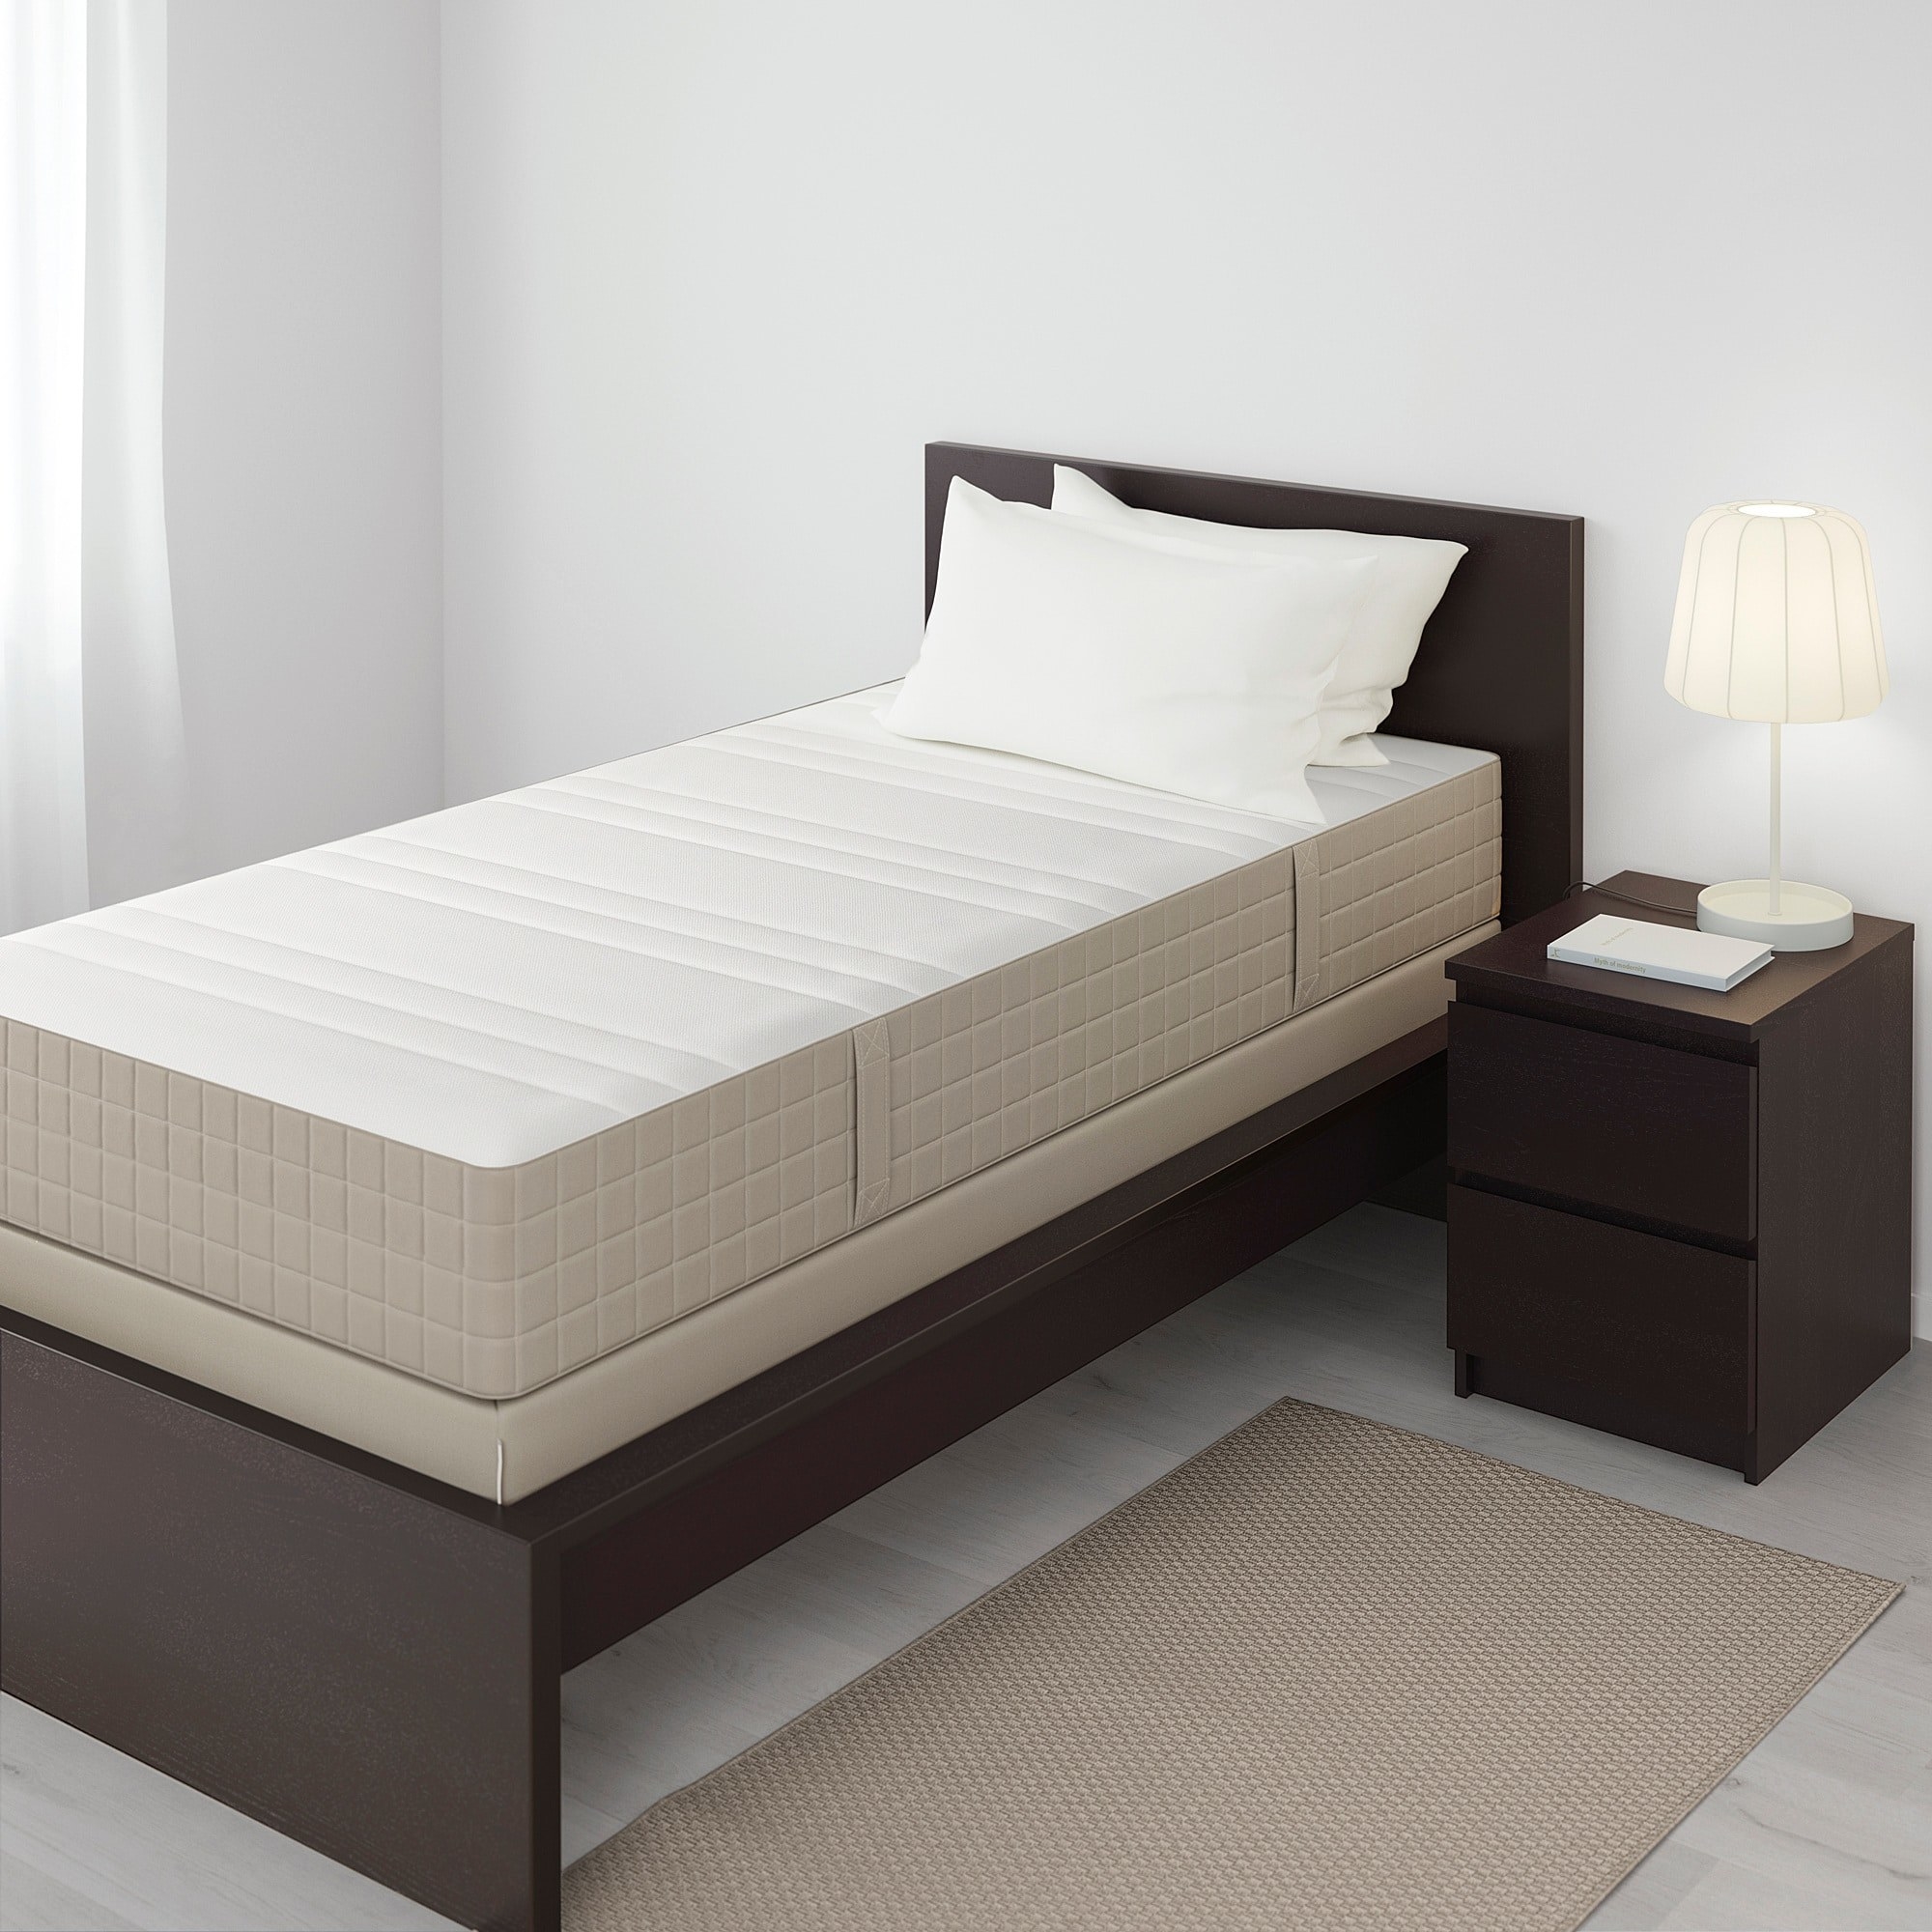 the mattress on a brown bed frame with pillows on top and a nightstand to the right